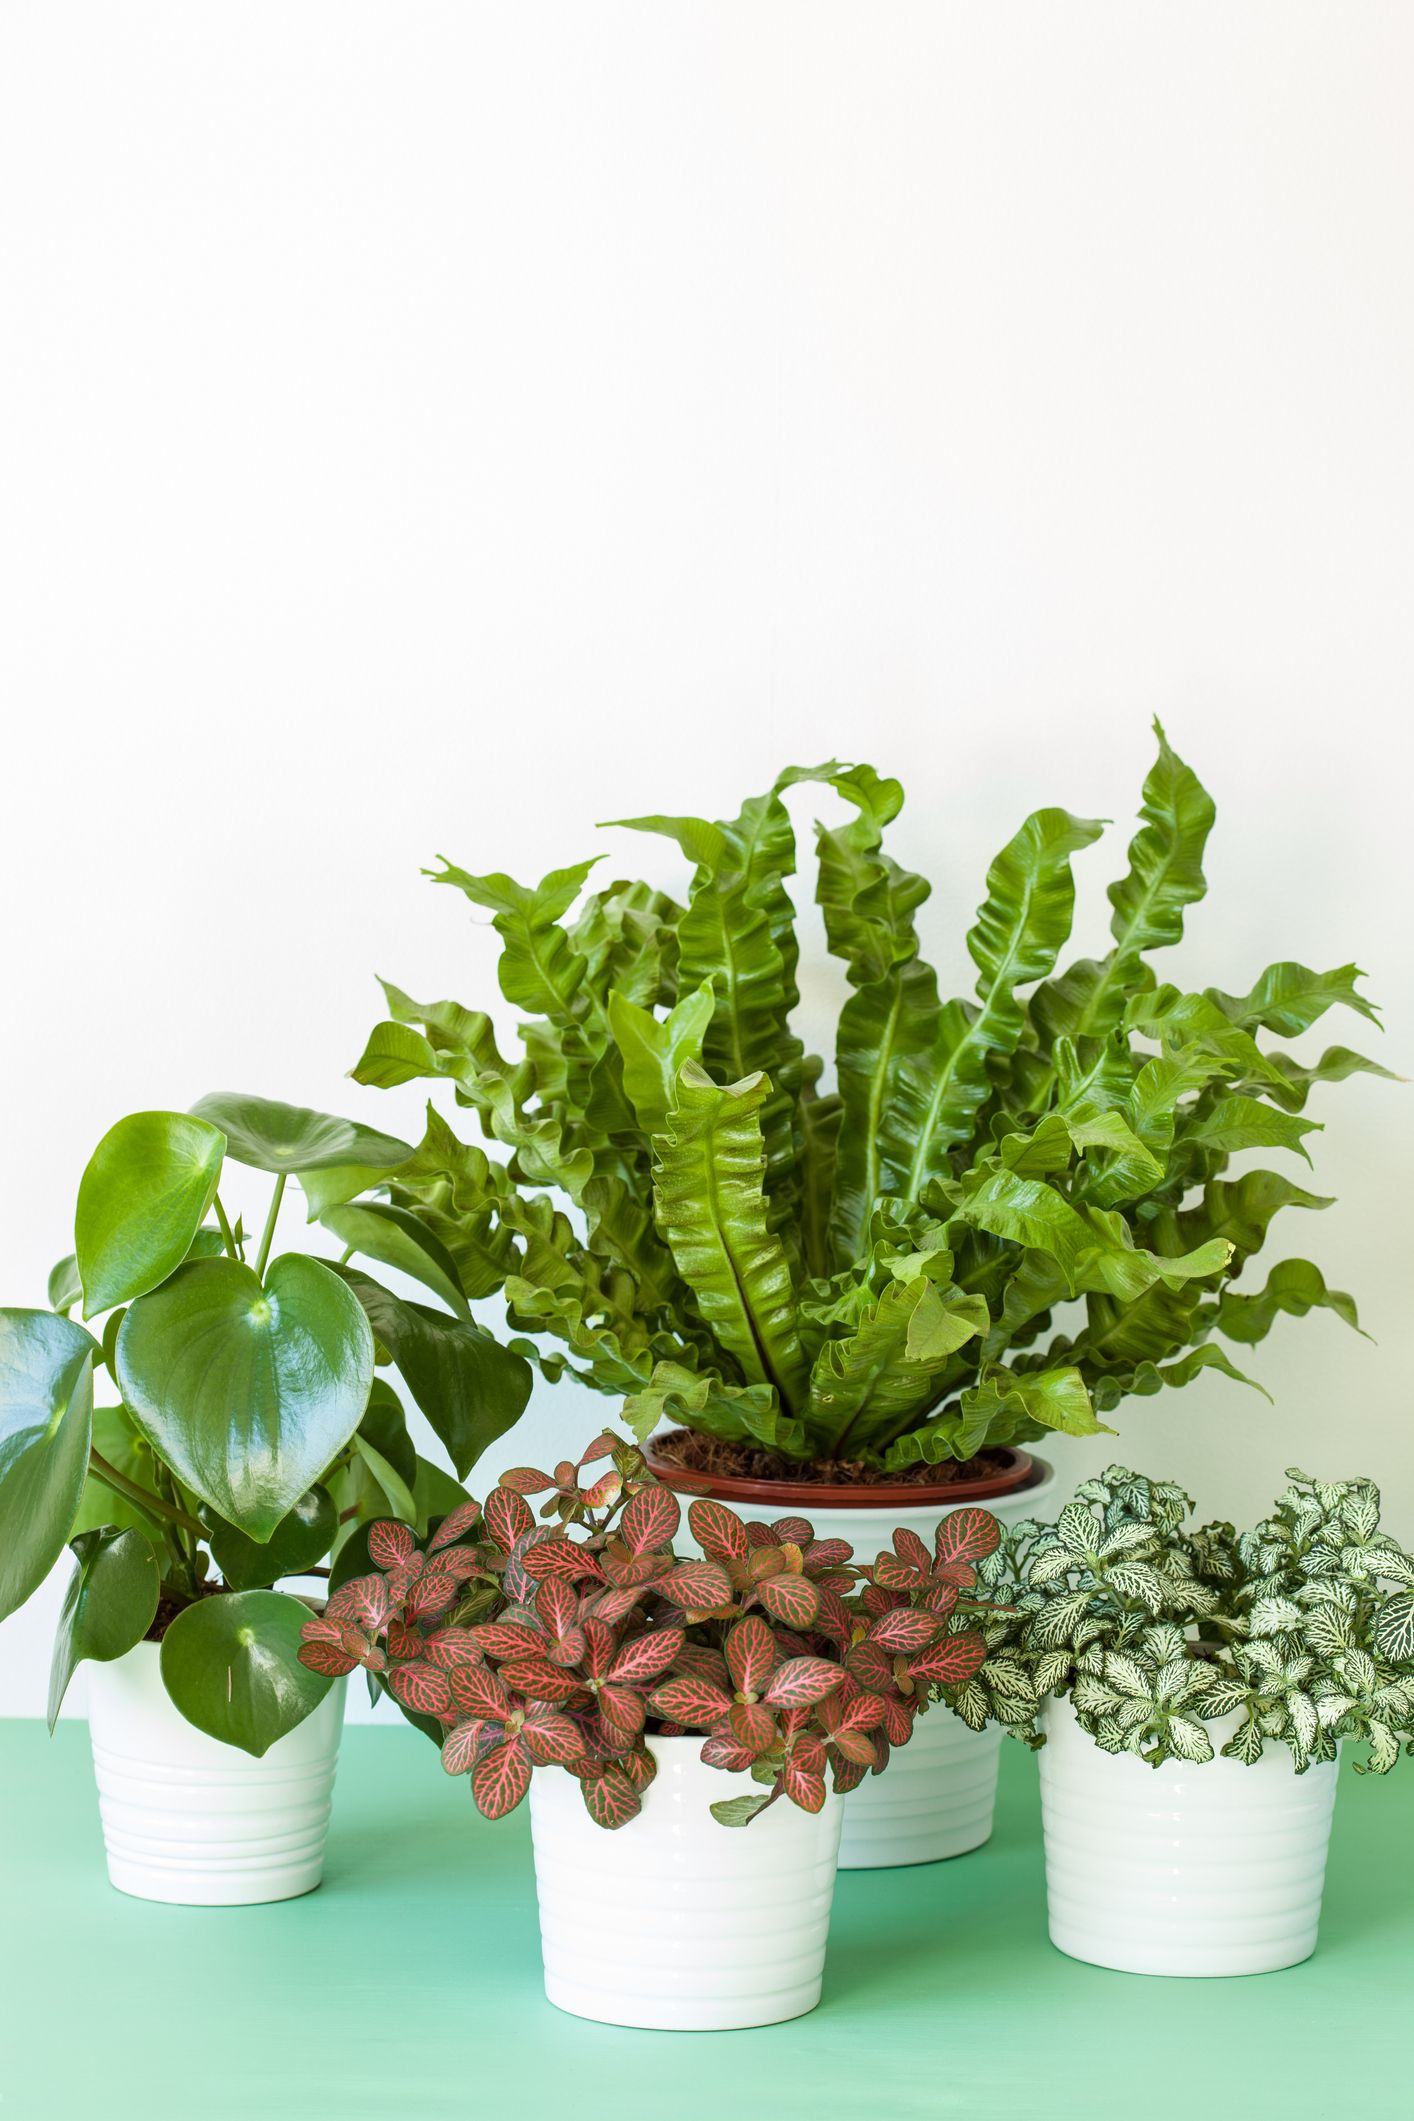 Must haves to taking care of your indoor plants